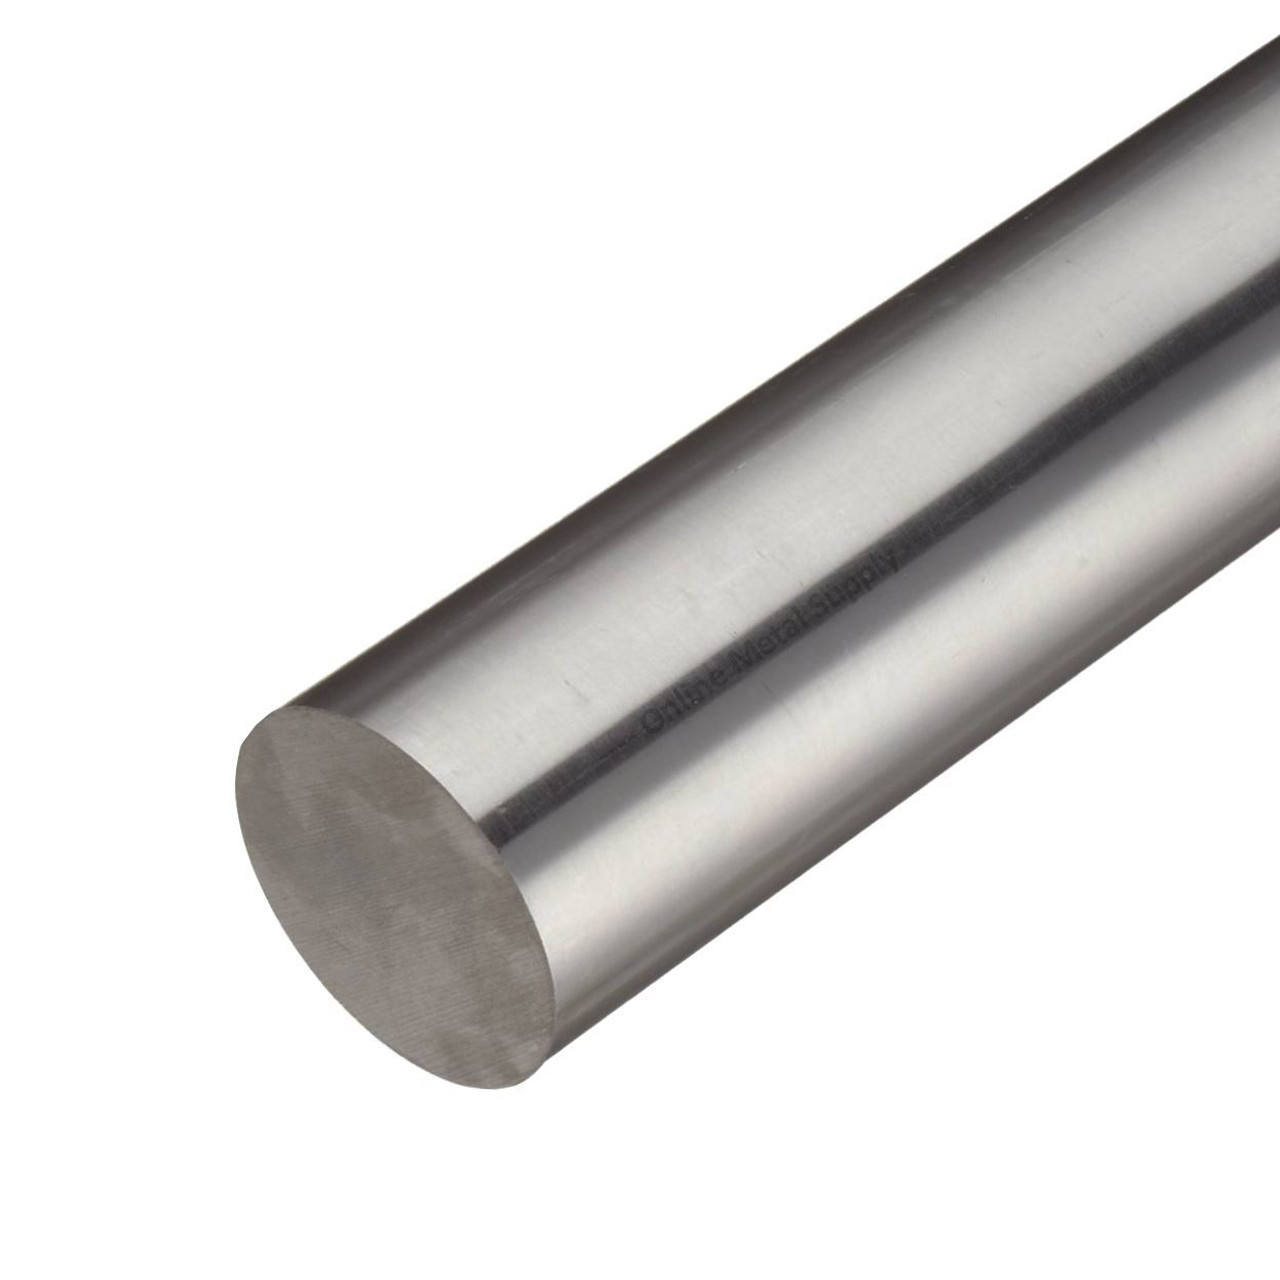 1.250 (1-1/4 inch) x 5 inches, 15-5 Cond A Stainless Steel Round Rod, Cold Finished